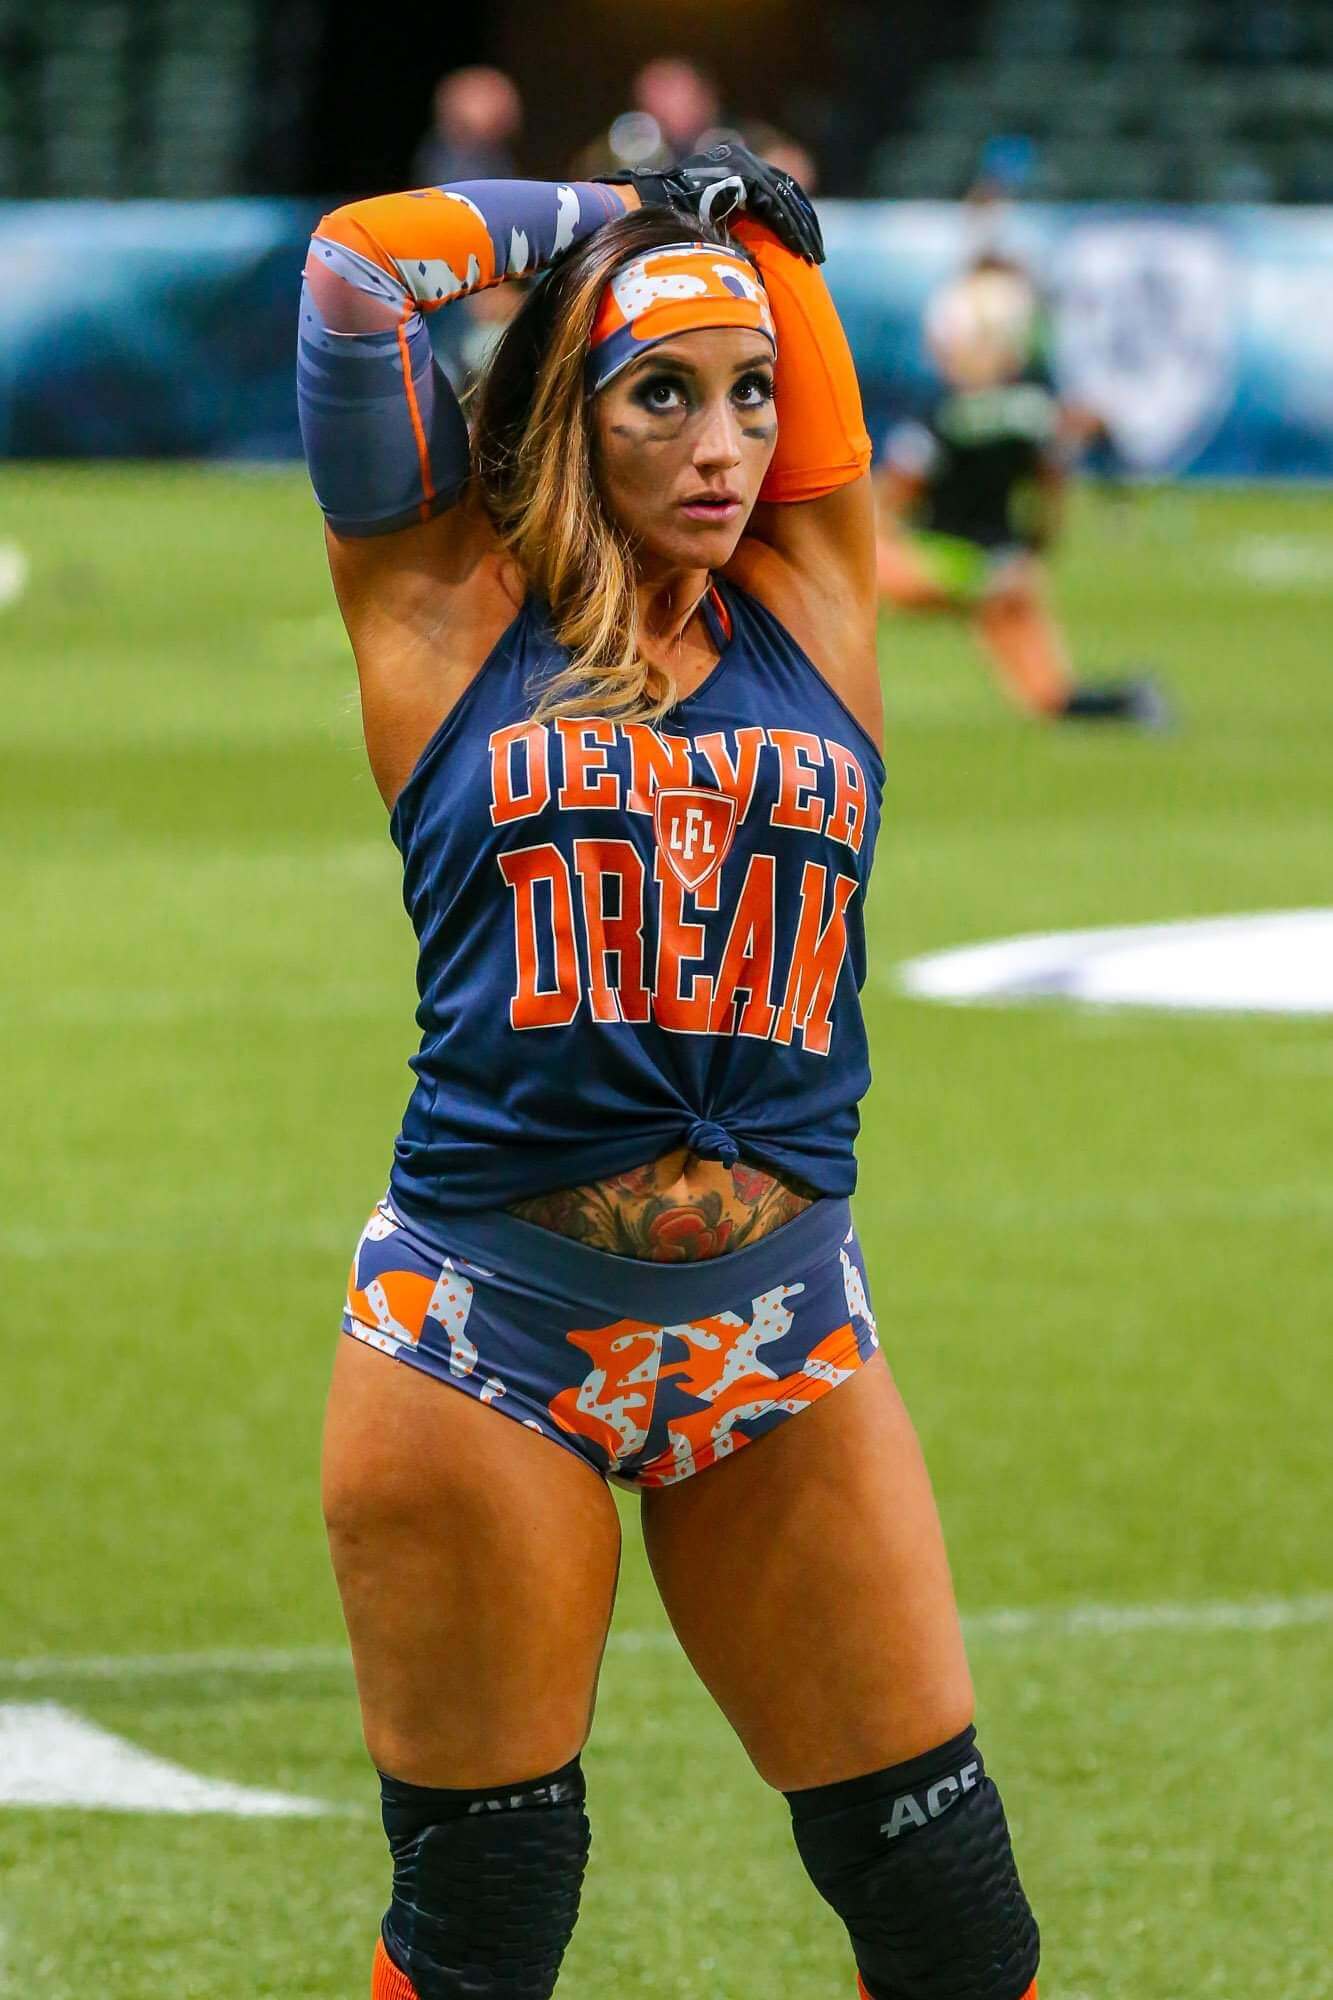 The Legends Football League Beautiful Women And Football, Need We Say Anymore! 35